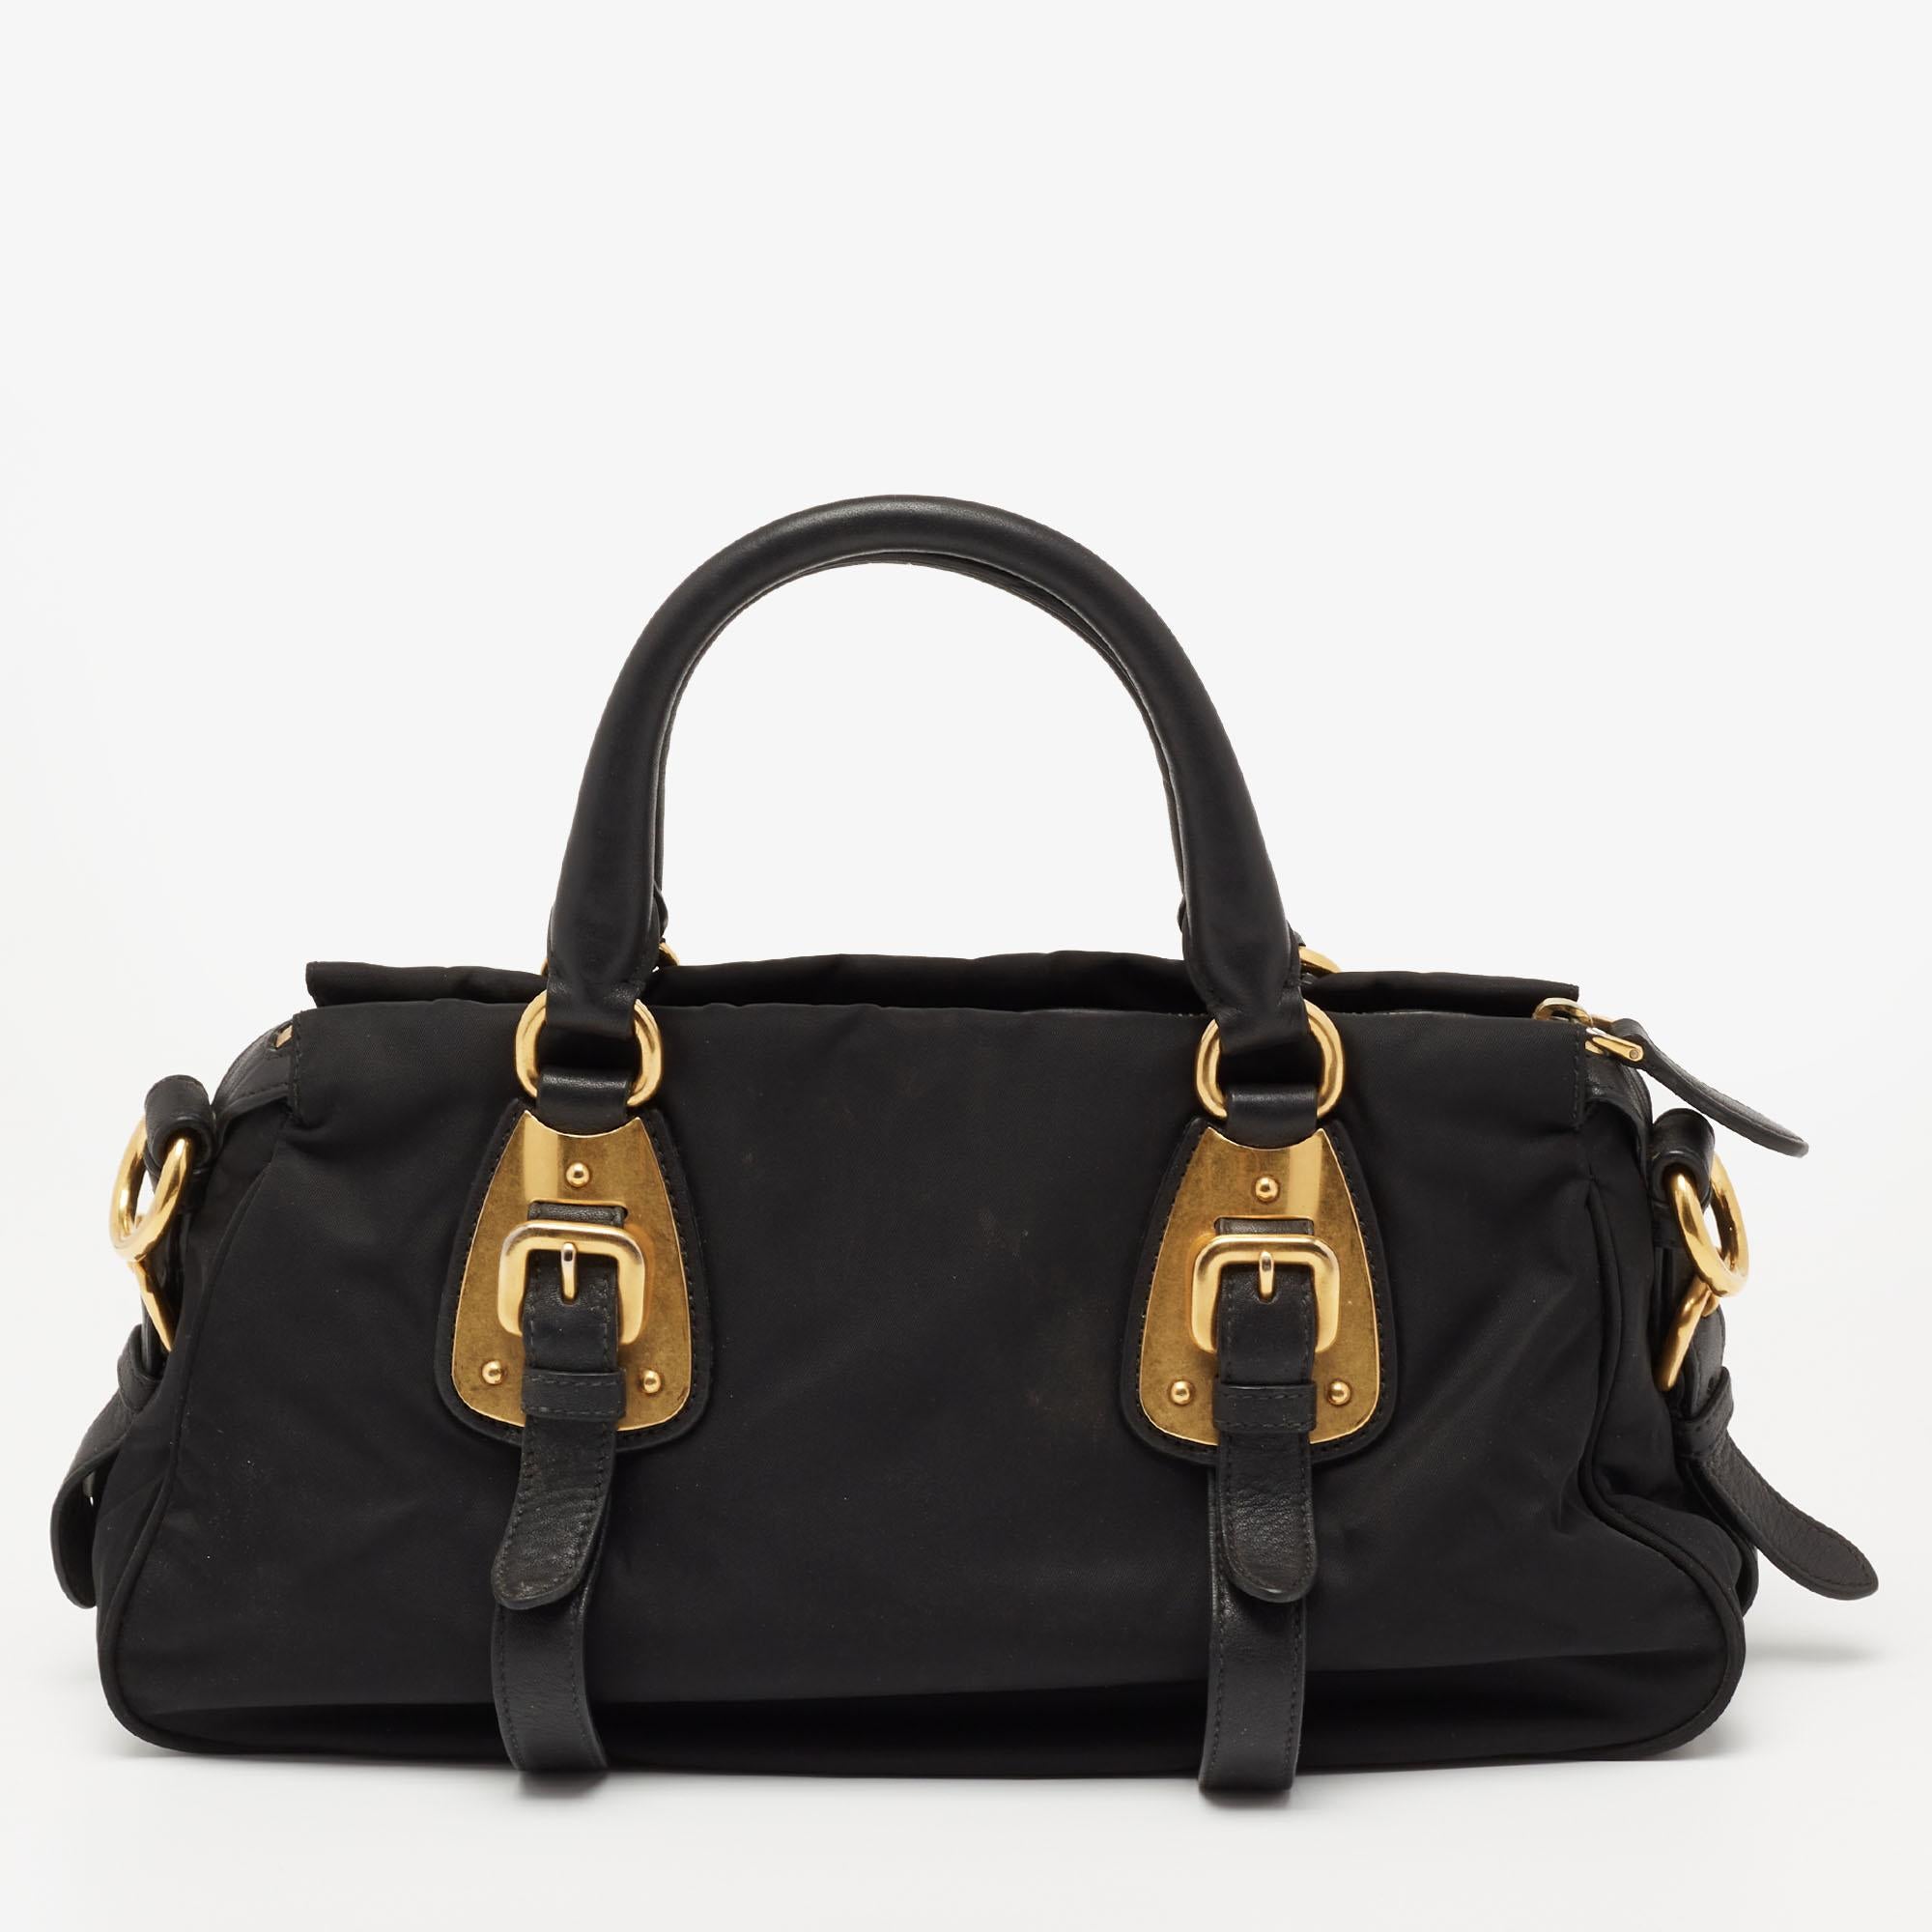 This Gaufre Chain tote from the House of Prada is designed to lend elegance and poise. It is made from black nylon on the exterior. It flaunts a logo accent on the front, a roomy fabric-lined interior, and dual handles. It is fitted with gold-tone